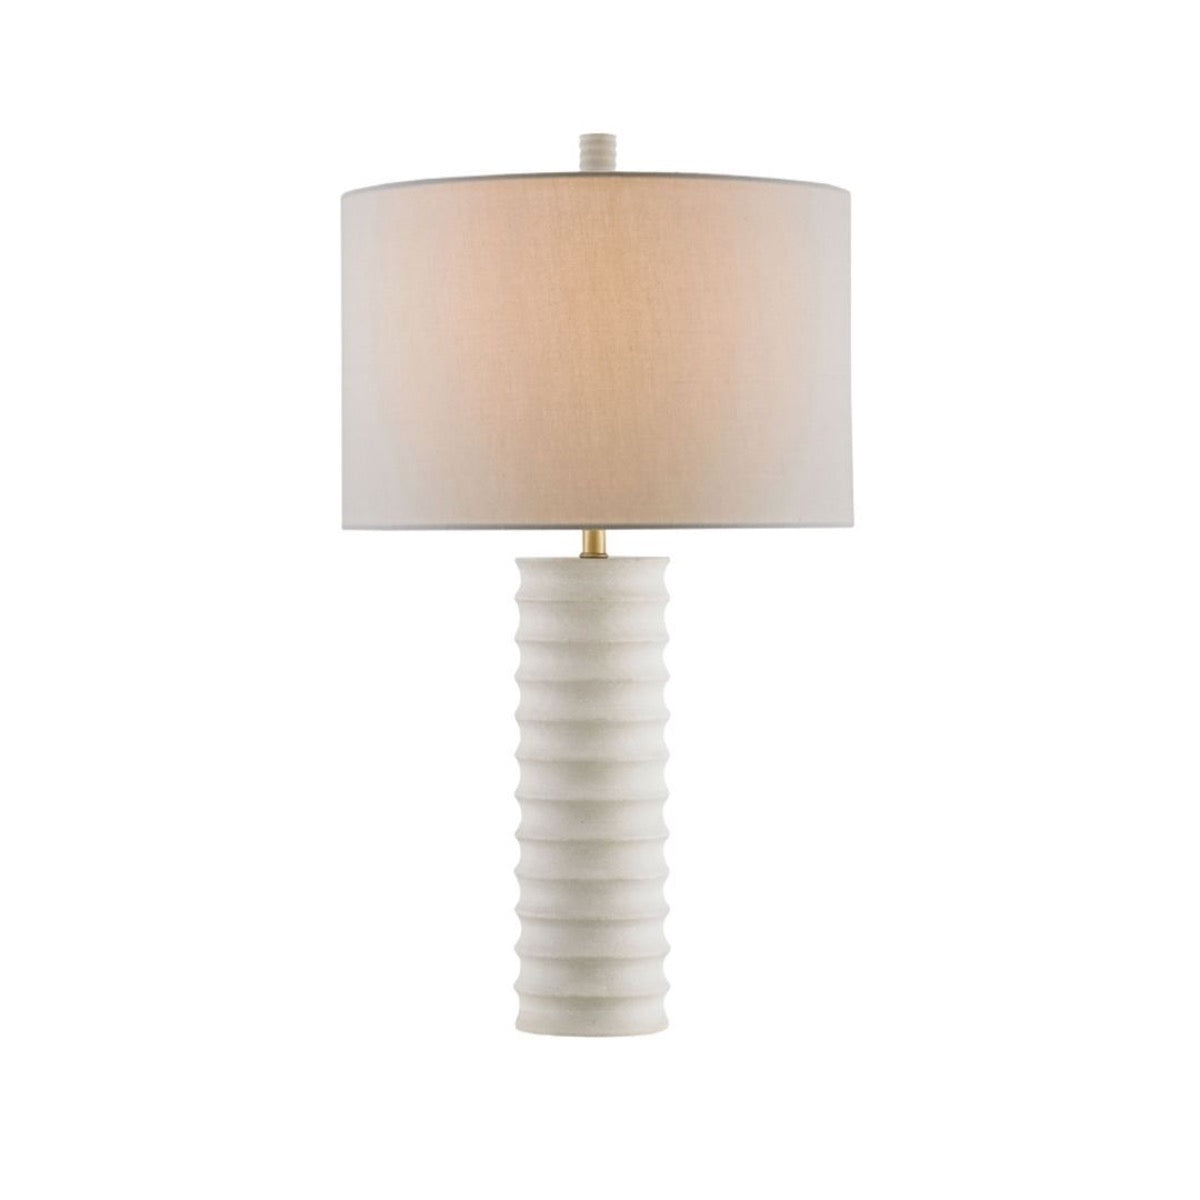 Elise Table Lamp. Front view.